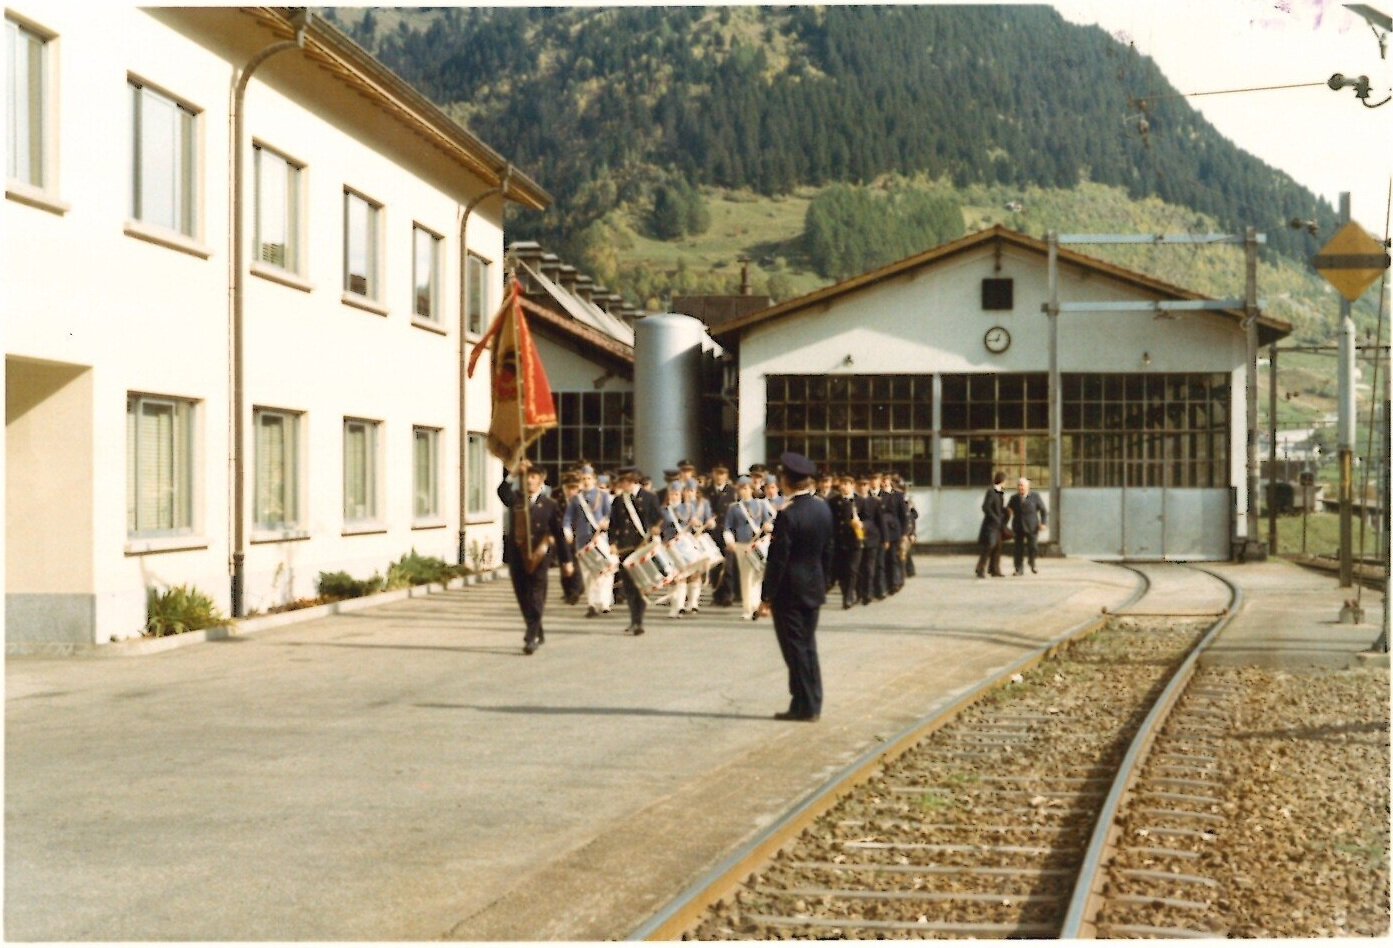 The band parades in the vicinity of the company buildings. The 1970s.